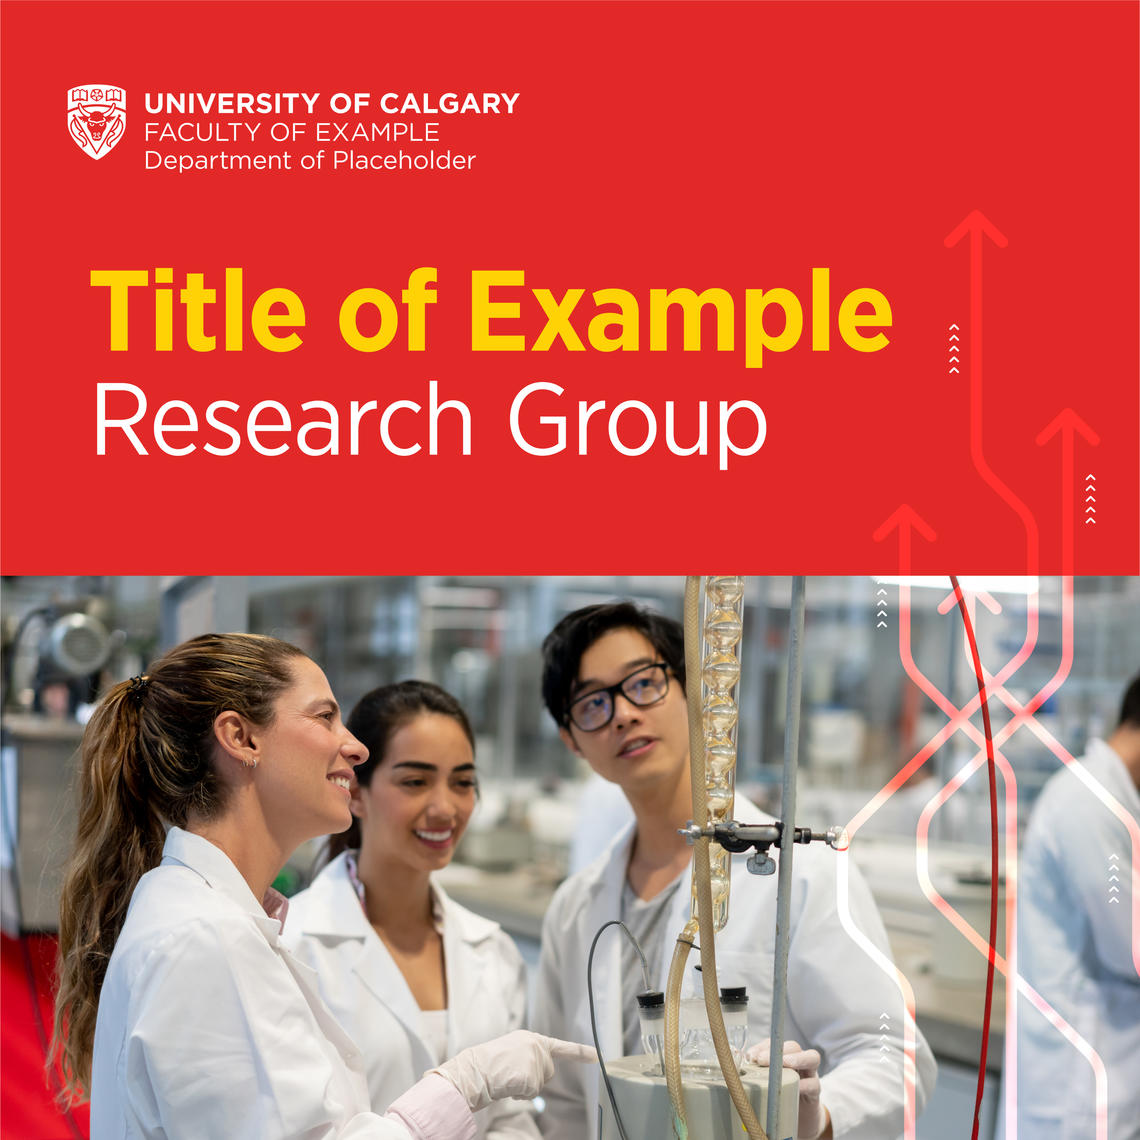 Example of using the UCalgary logo with a project or unit title